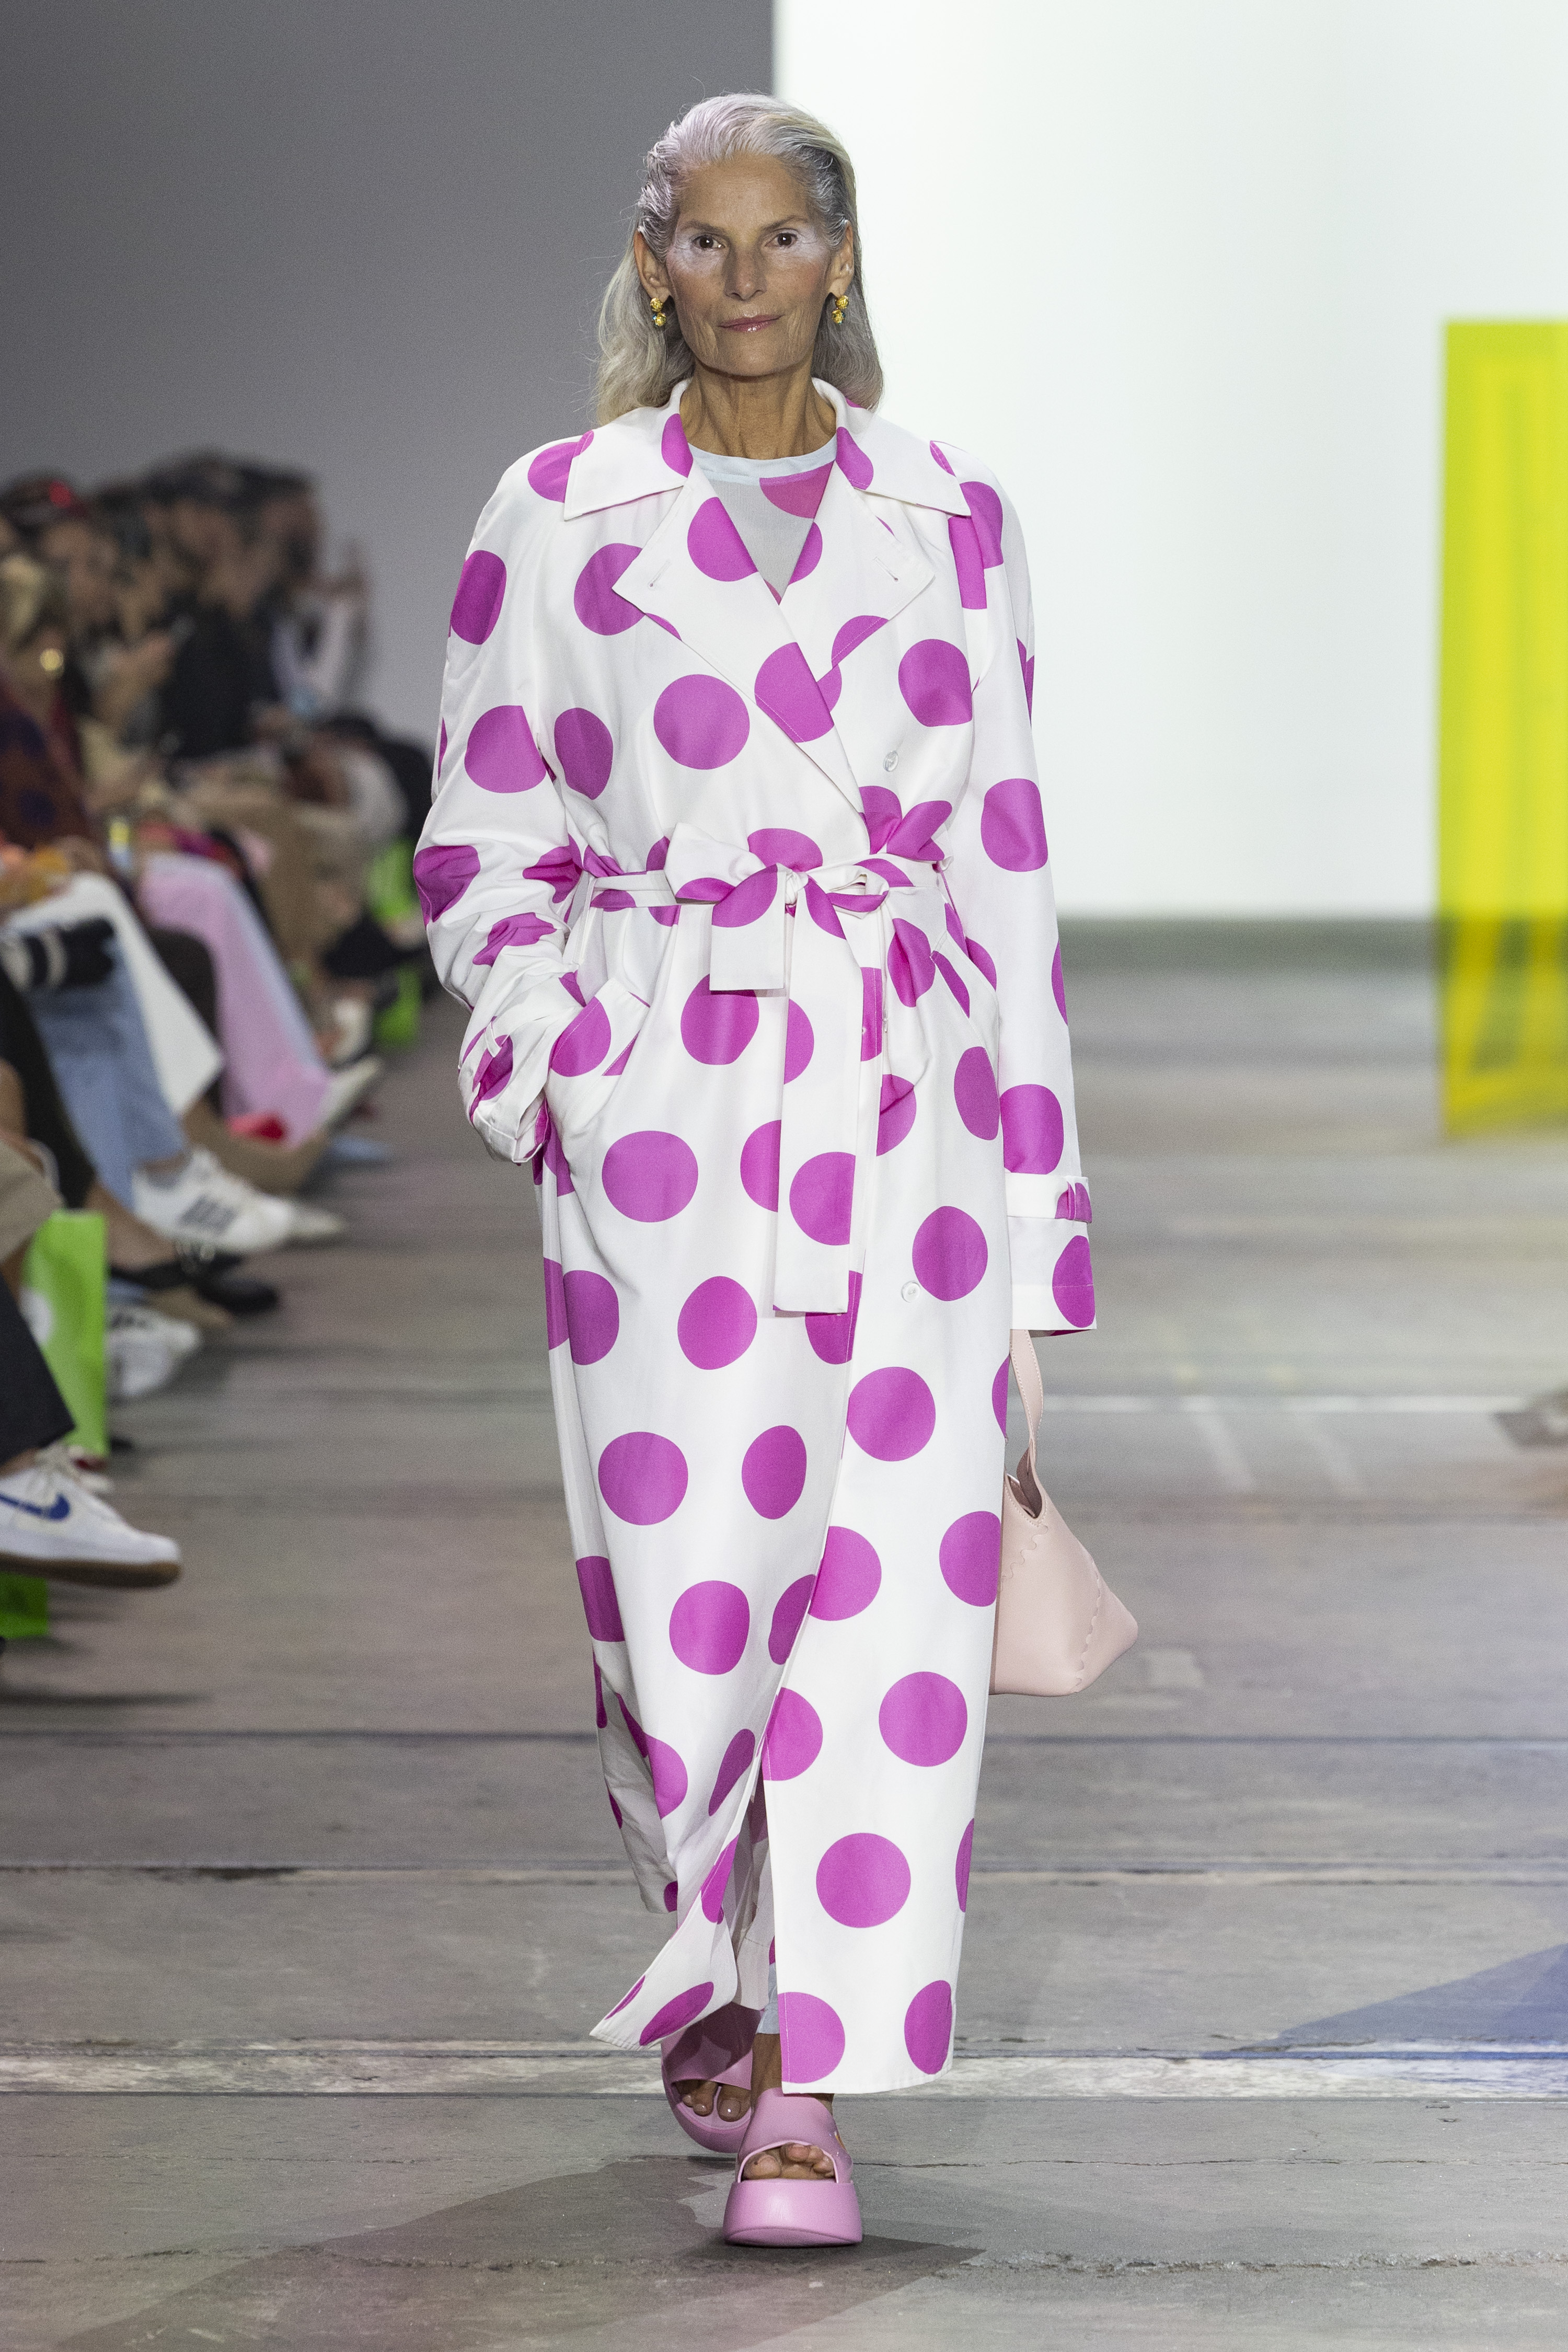 An elderly white woman with white hair models a white and pink polka-dot jumpsuit on a fashion runway.